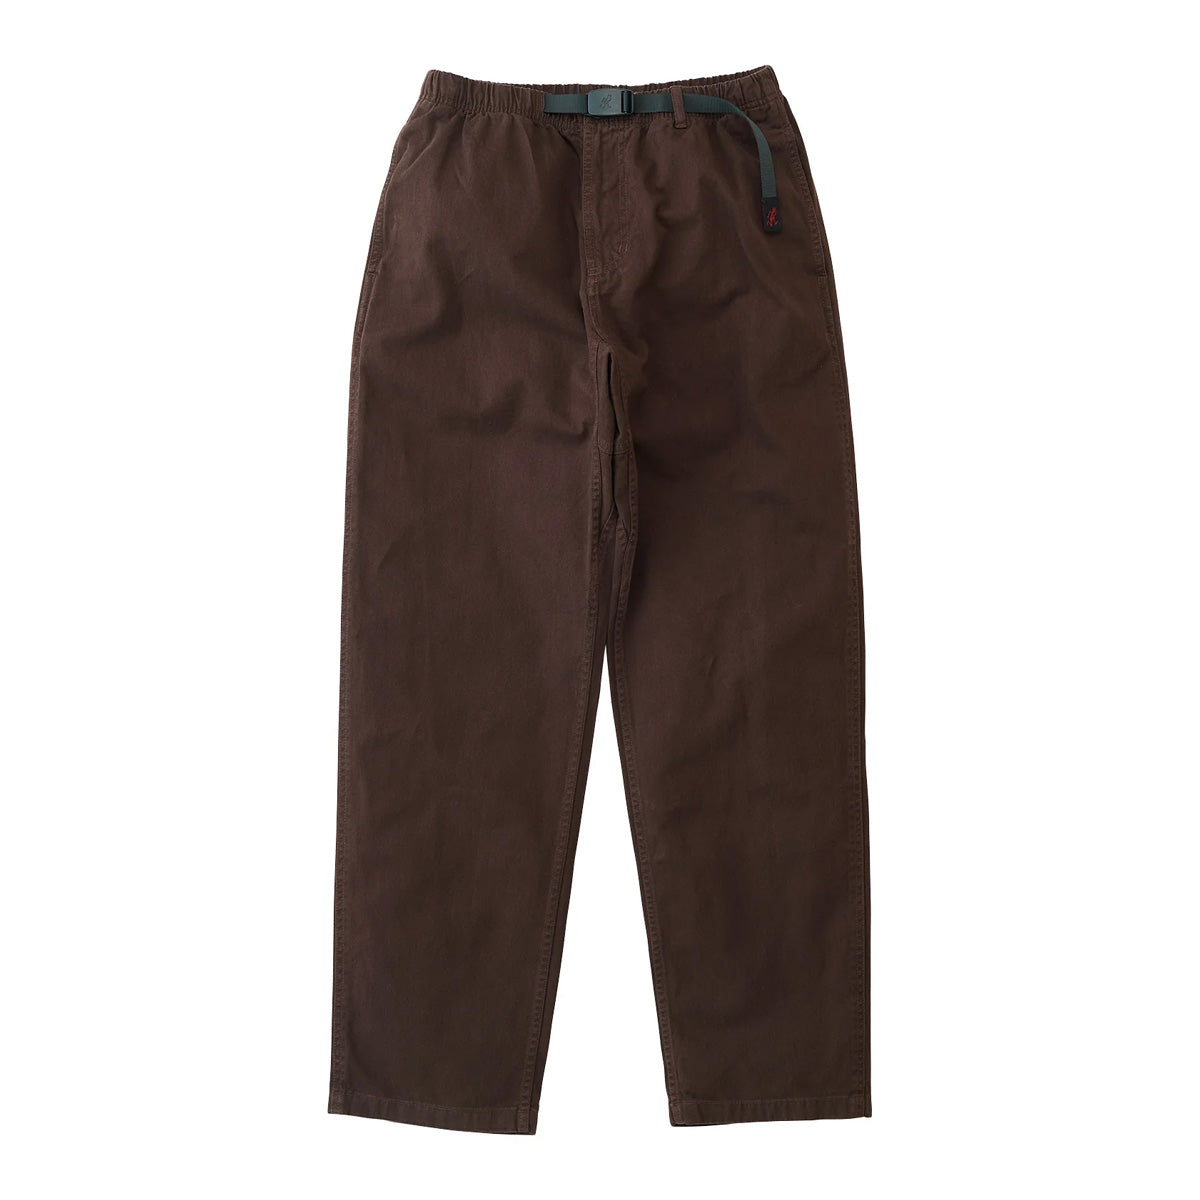 Dark brown gramicci outdoor trousers with adjustable waist. Free uk shipping over £50